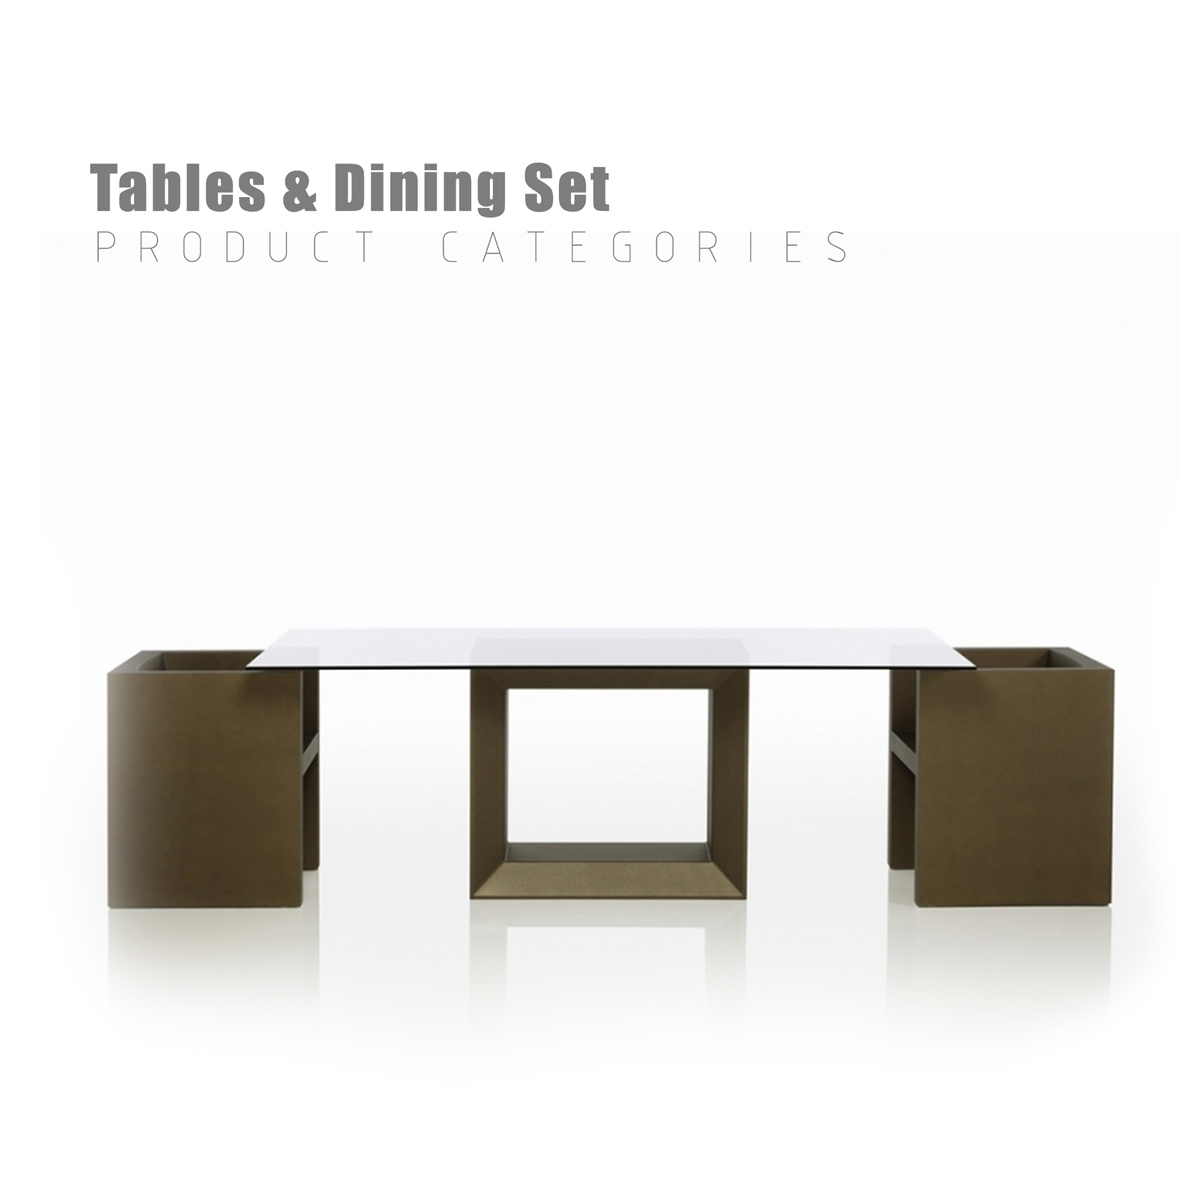 Tables-&-Dining-Set